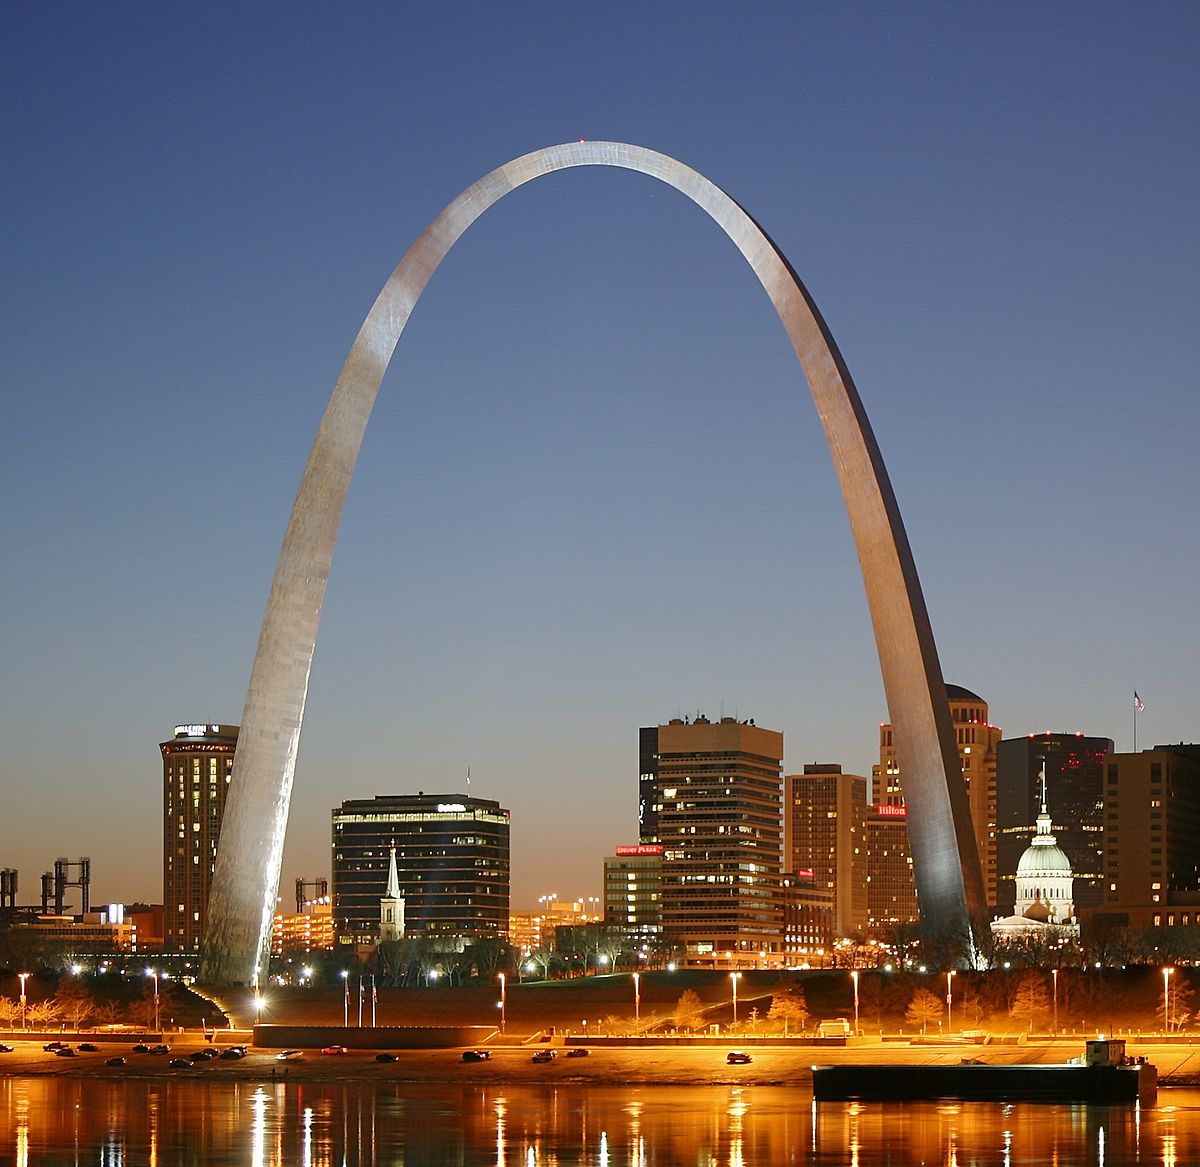 What State Is Home To The Gateway Arch?